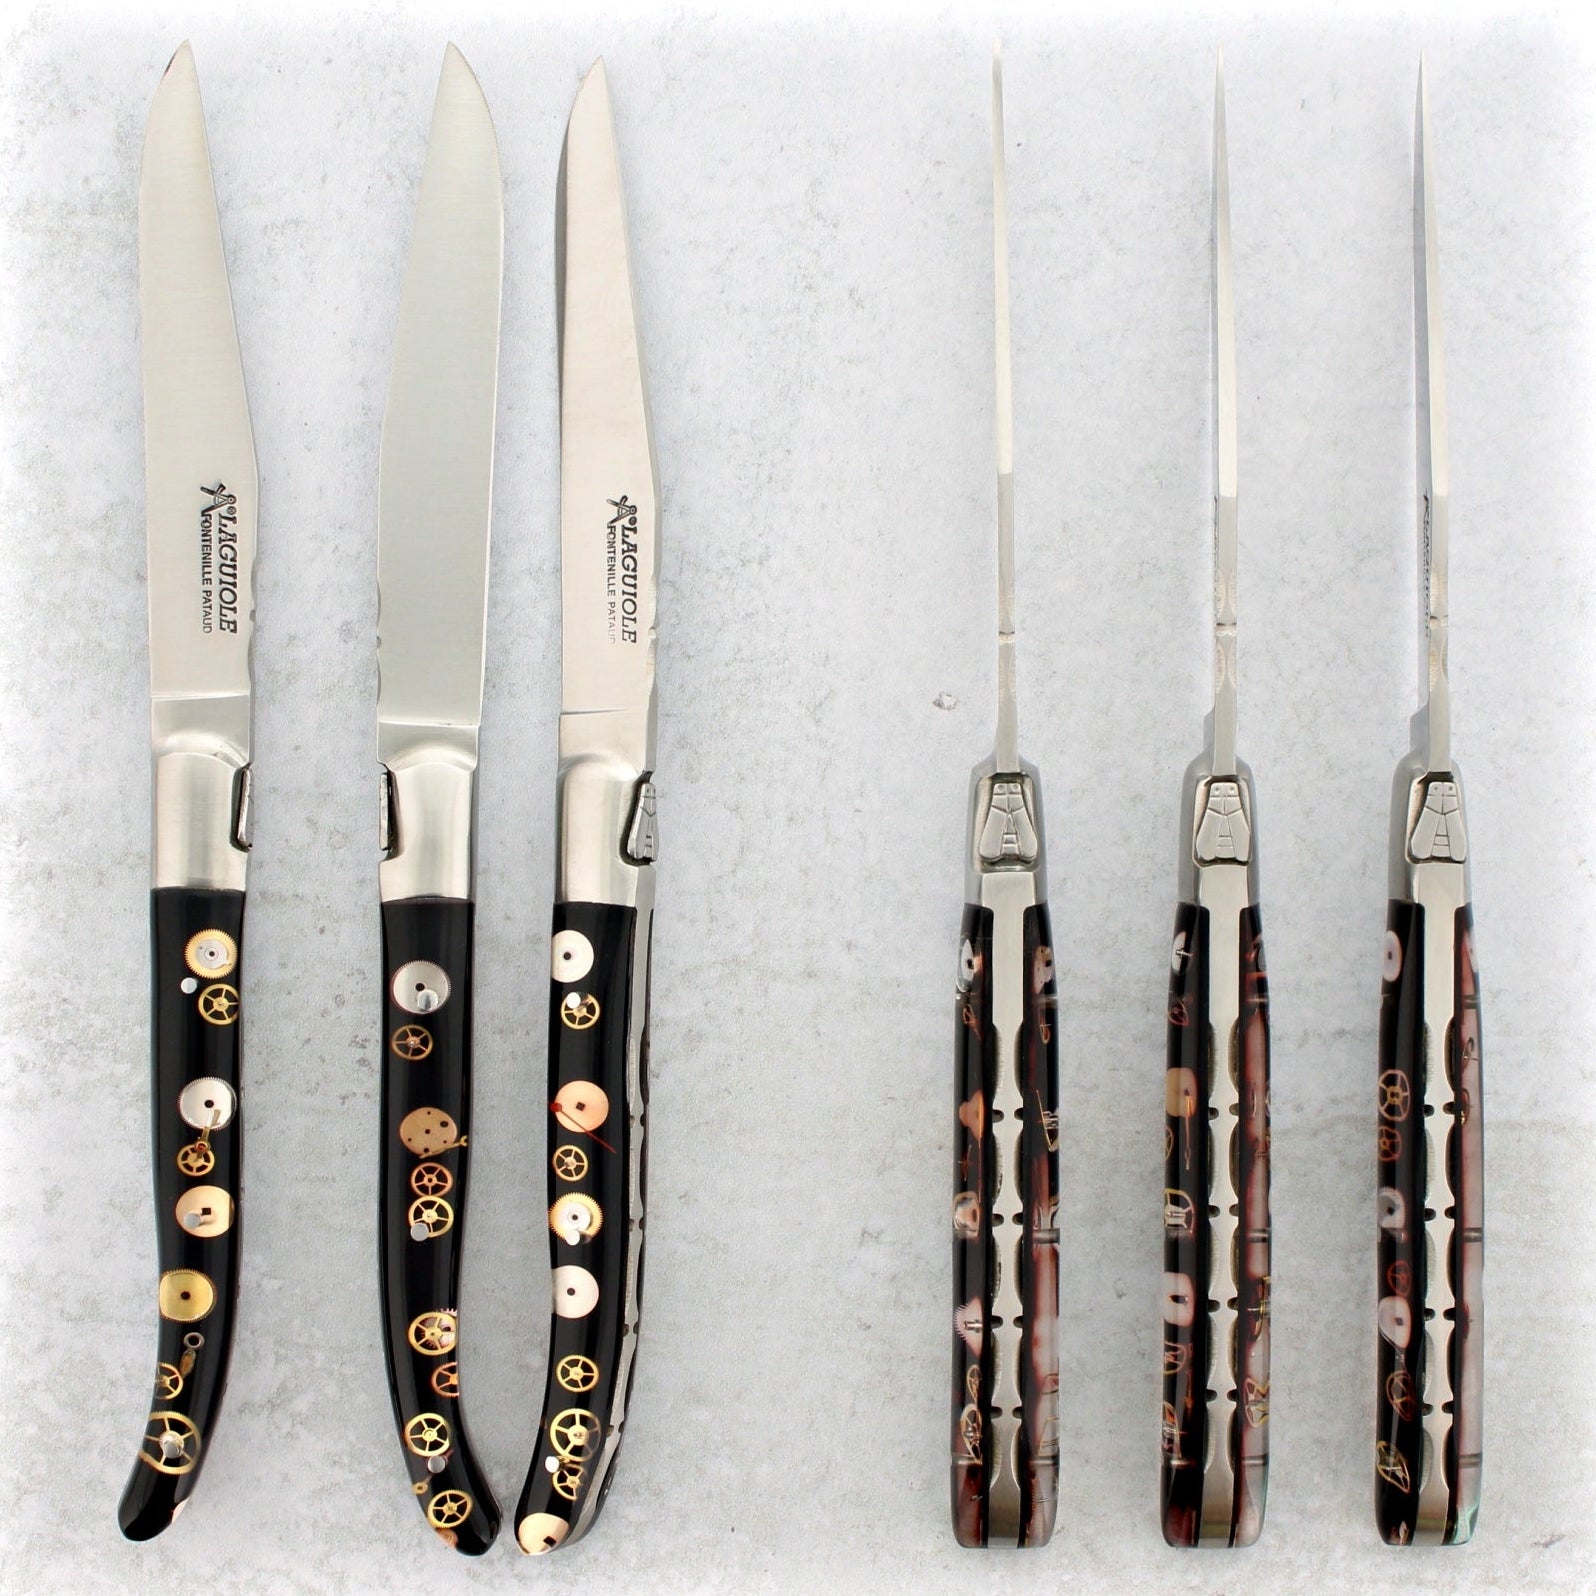 Laguiole Forged Steak Knives Genuine Timepiece Gears Inlay